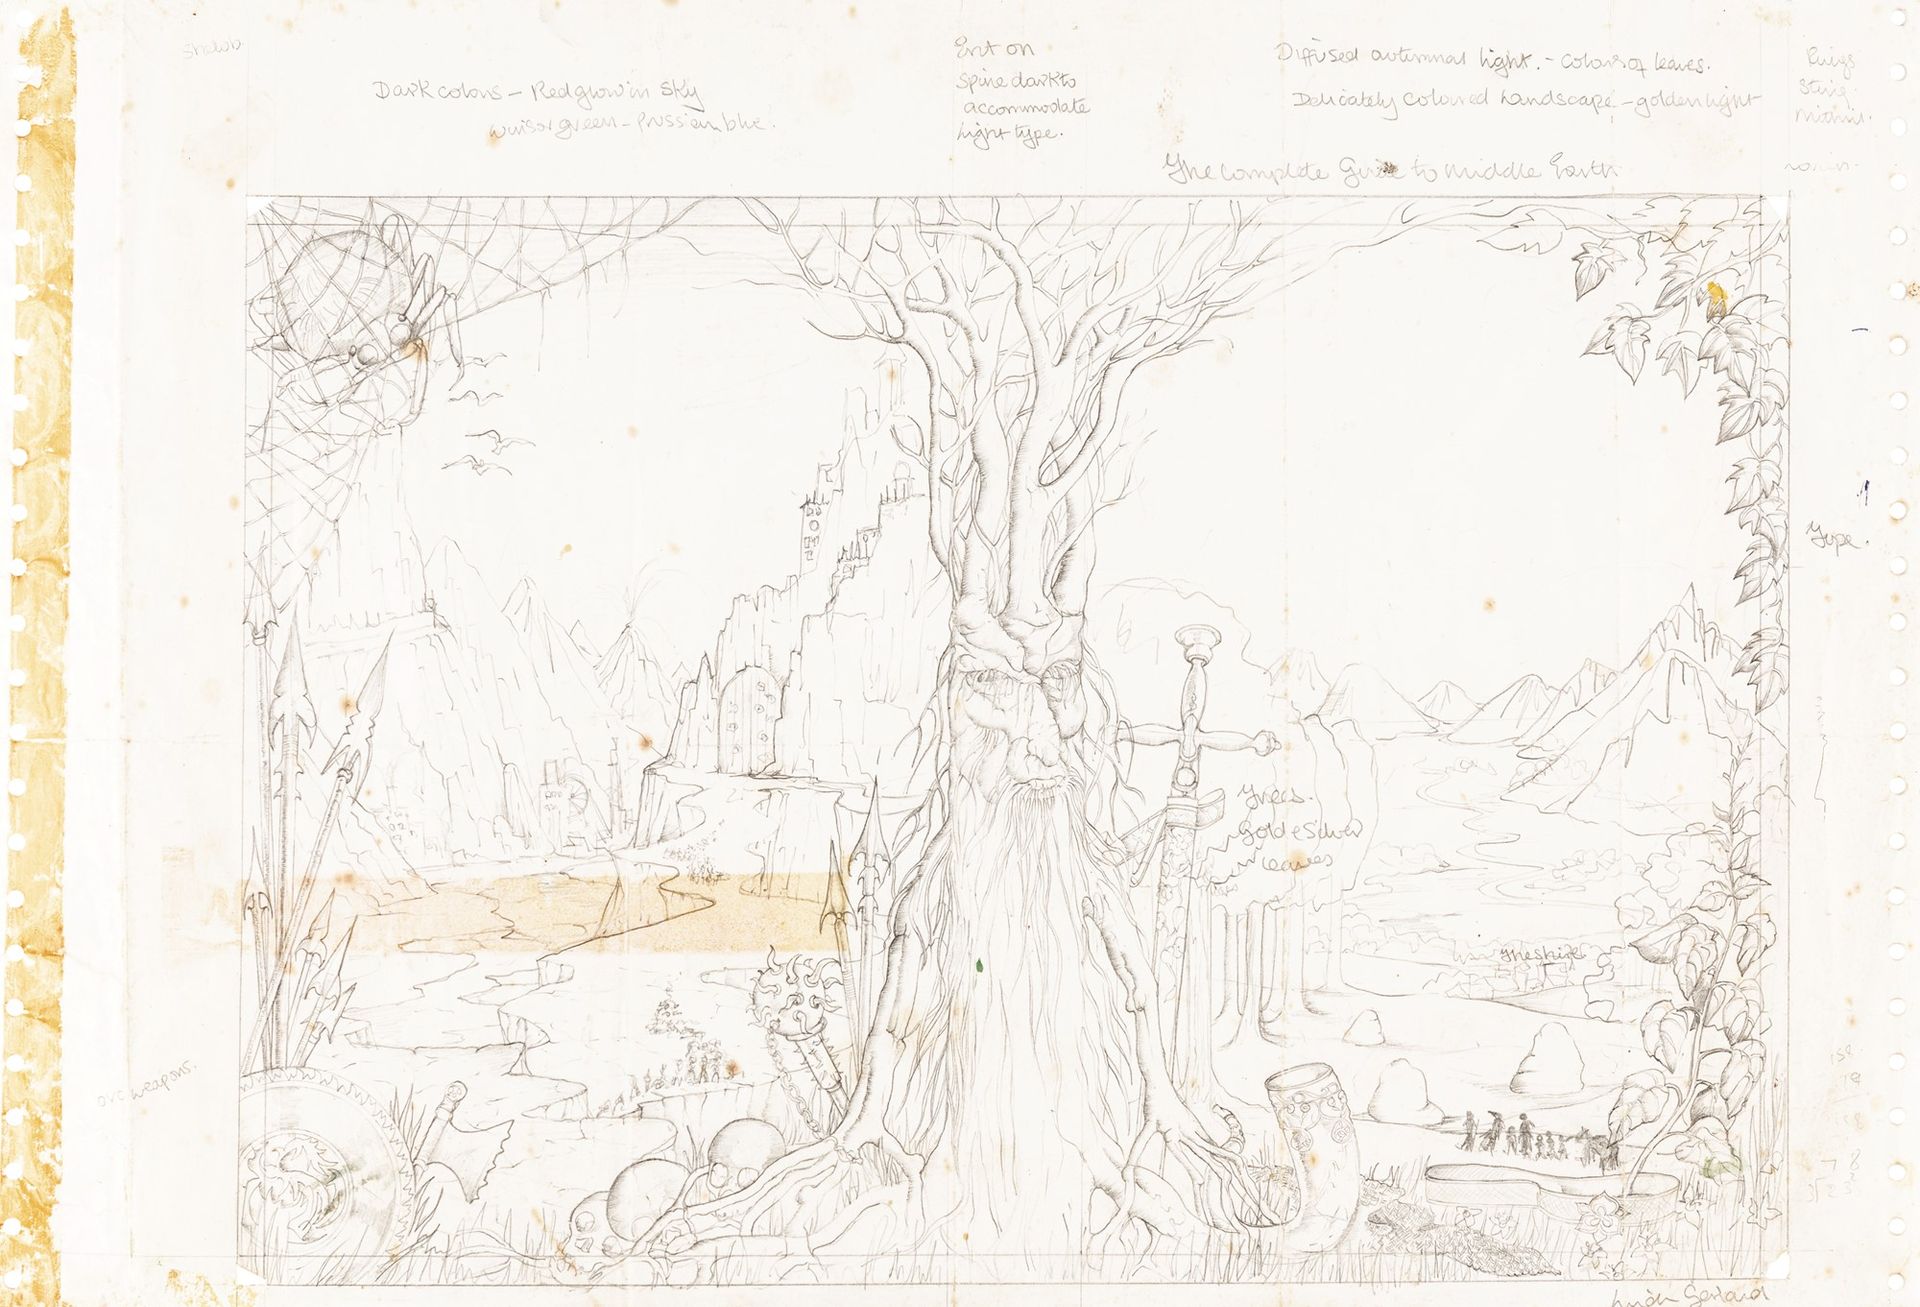 Linda Garland The Complete Guide to Middle-Earth, 1978

crayon sur papier
45 x 3&hellip;